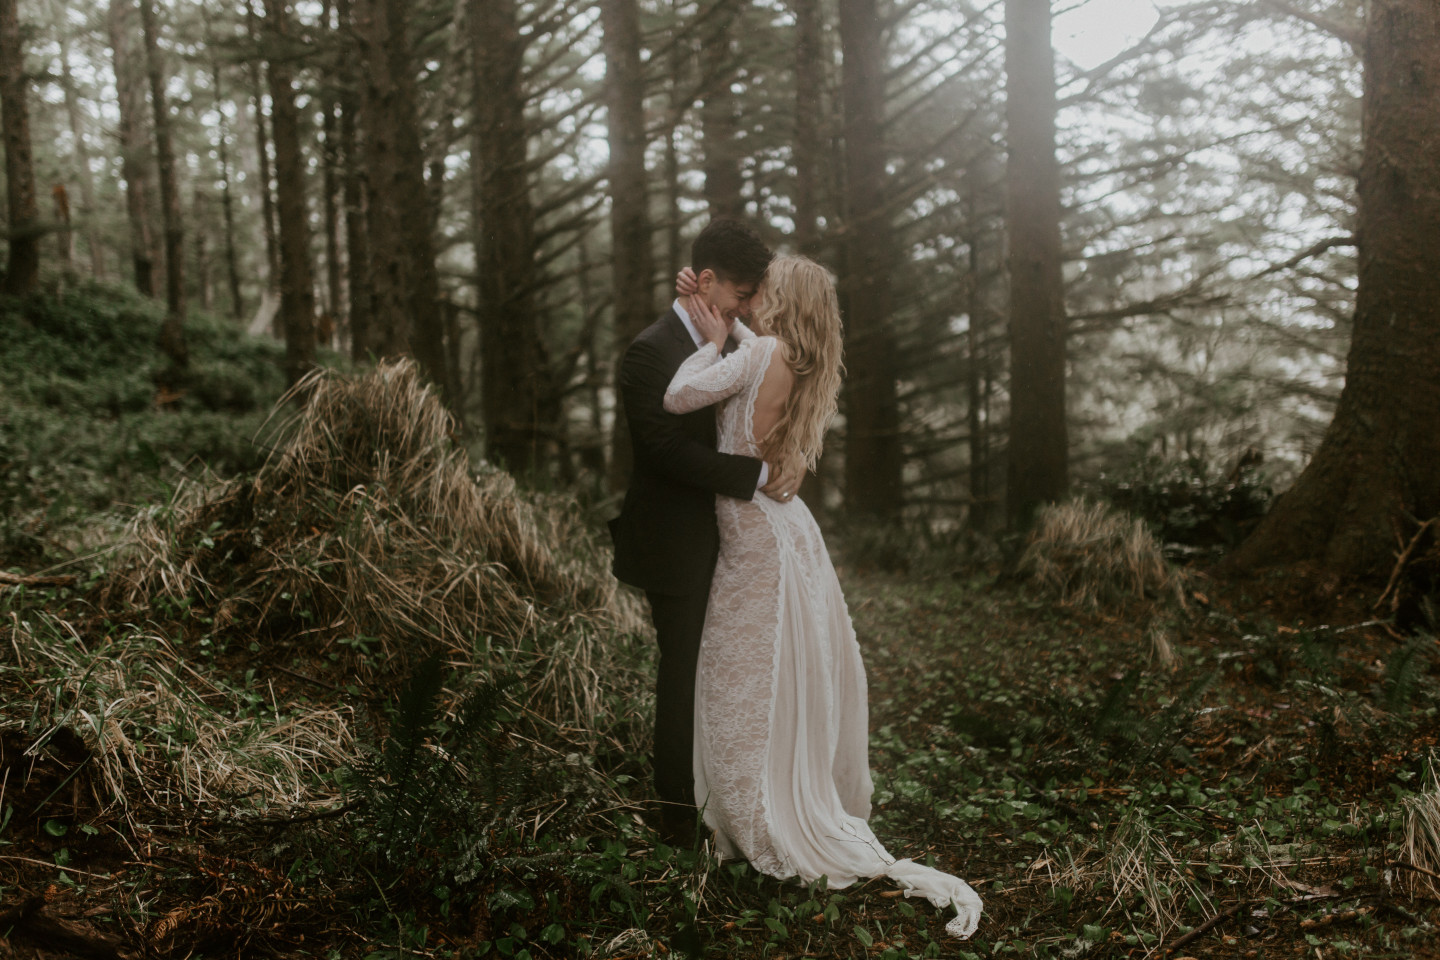 Hannah and Grant in the trees of Cannon Beach, Oregon. Wedding photography in Portland Oregon by Sienna Plus Josh.